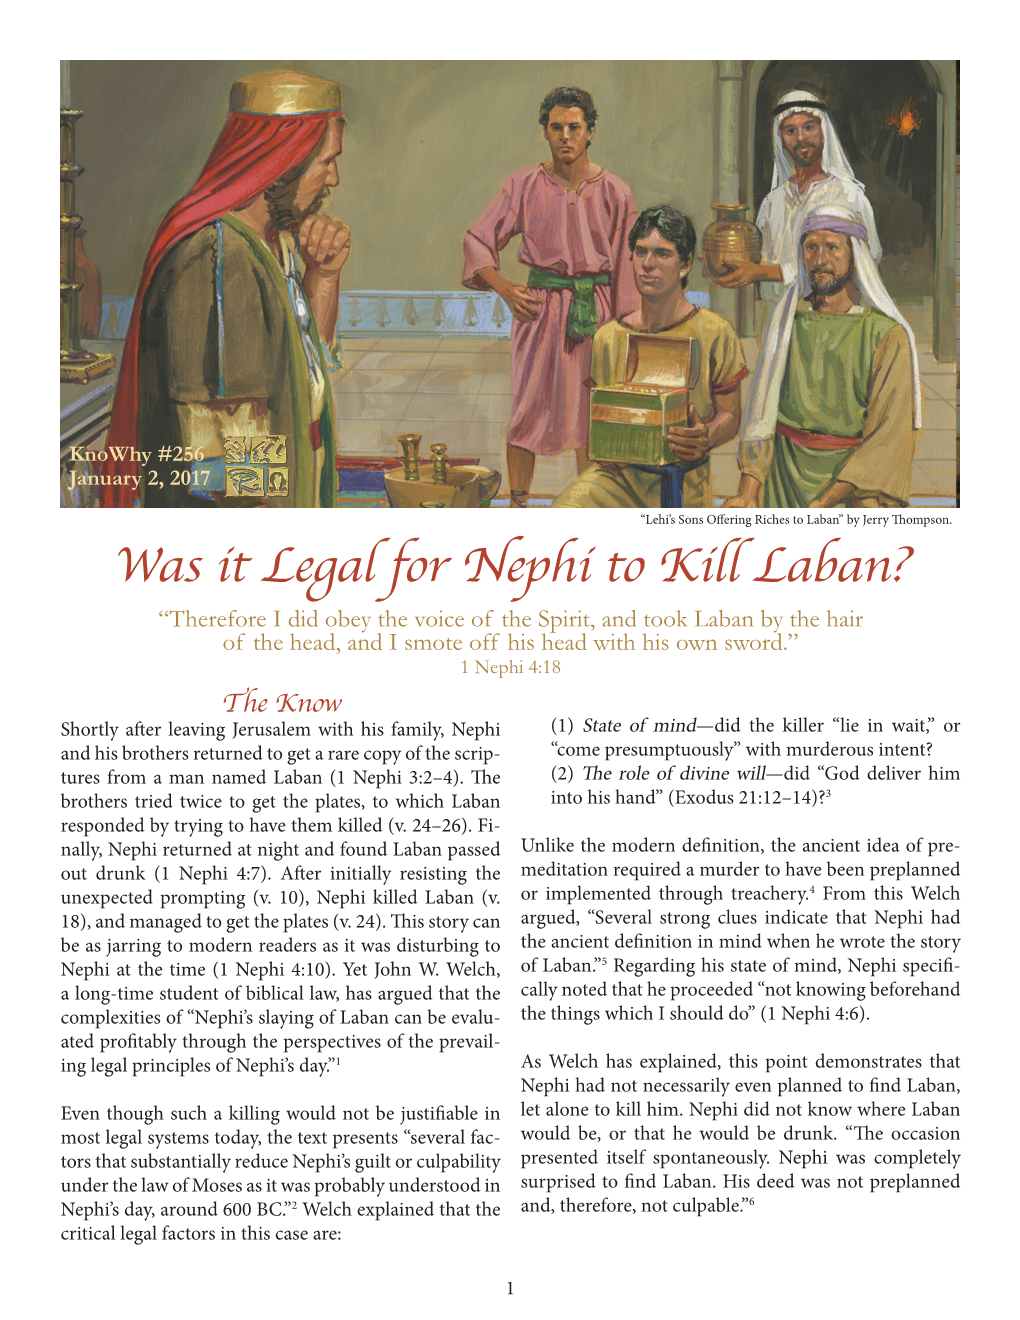 Was It Legal for Nephi to Kill Laban?